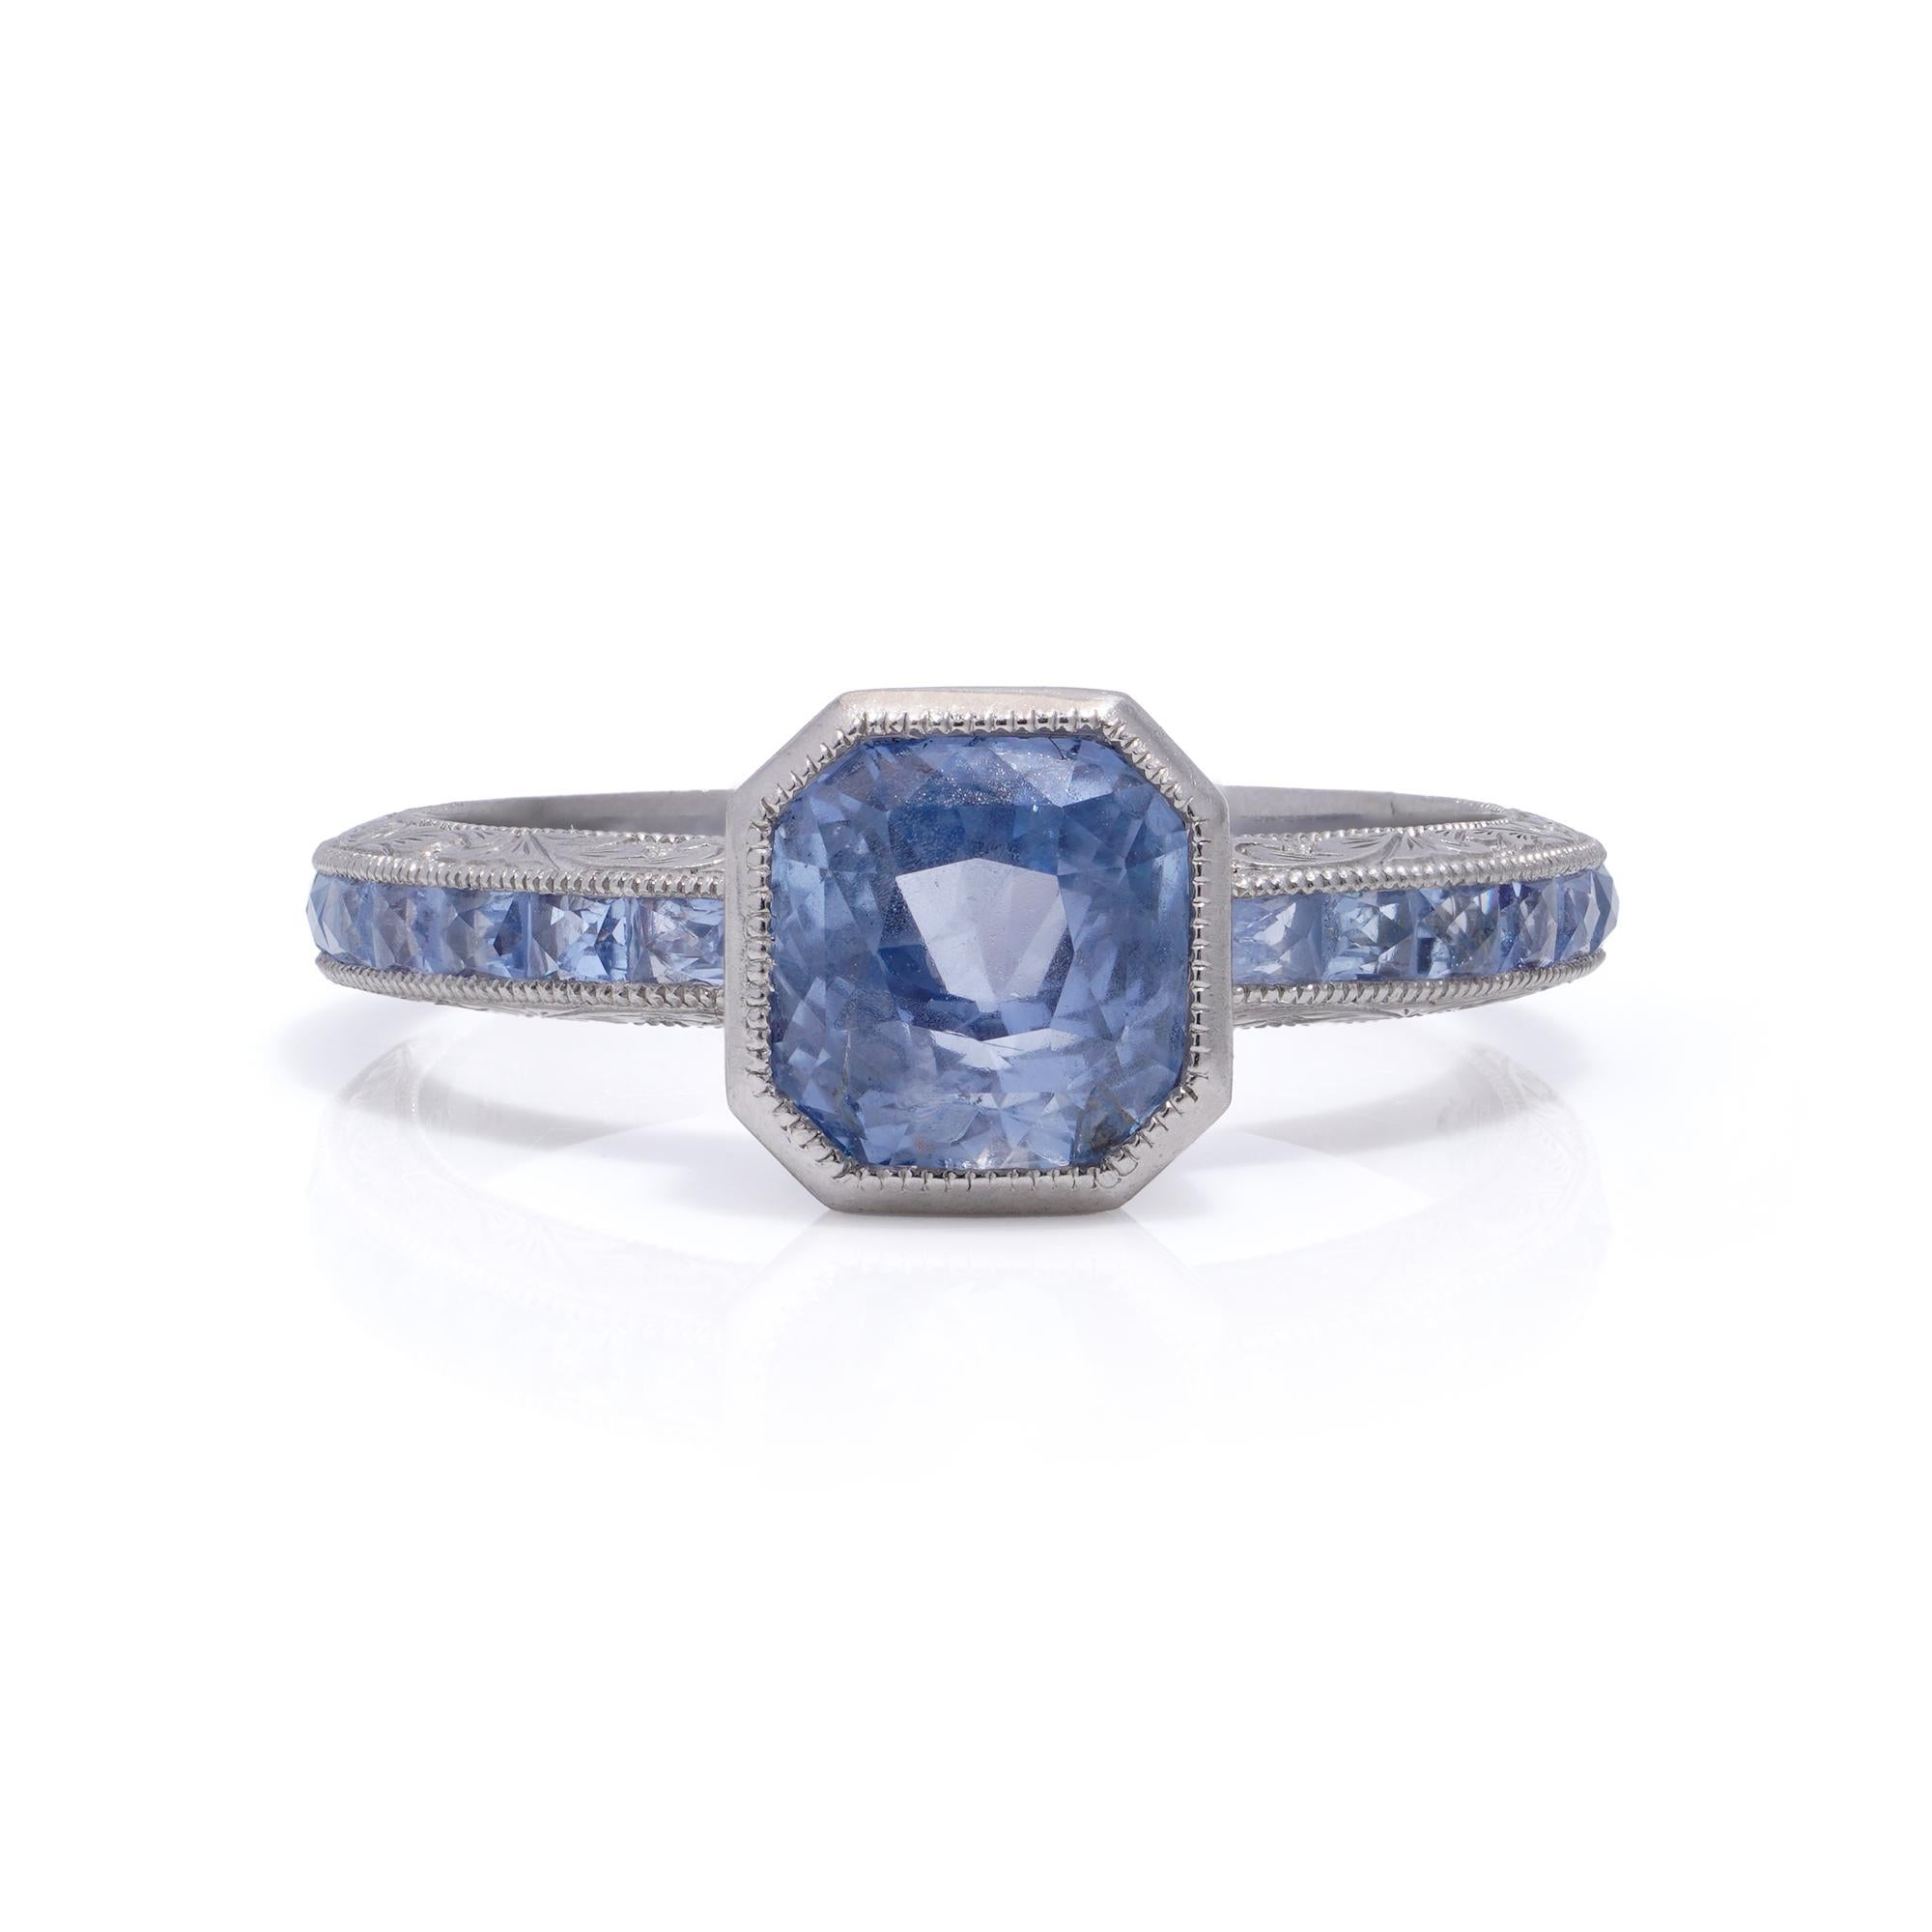 JoAq 850 Platinum Art Deco-inspired Sapphire ring. 
The ring is nicely set with an octagon-shaped centre sapphire and surrounded by French-cut sapphires. 

Dimensions - 
Ring Size (UK) = M 1/2 (EU) = 54.5  (US) = 6.75 
Weight: 5.00 grams

Sapphires